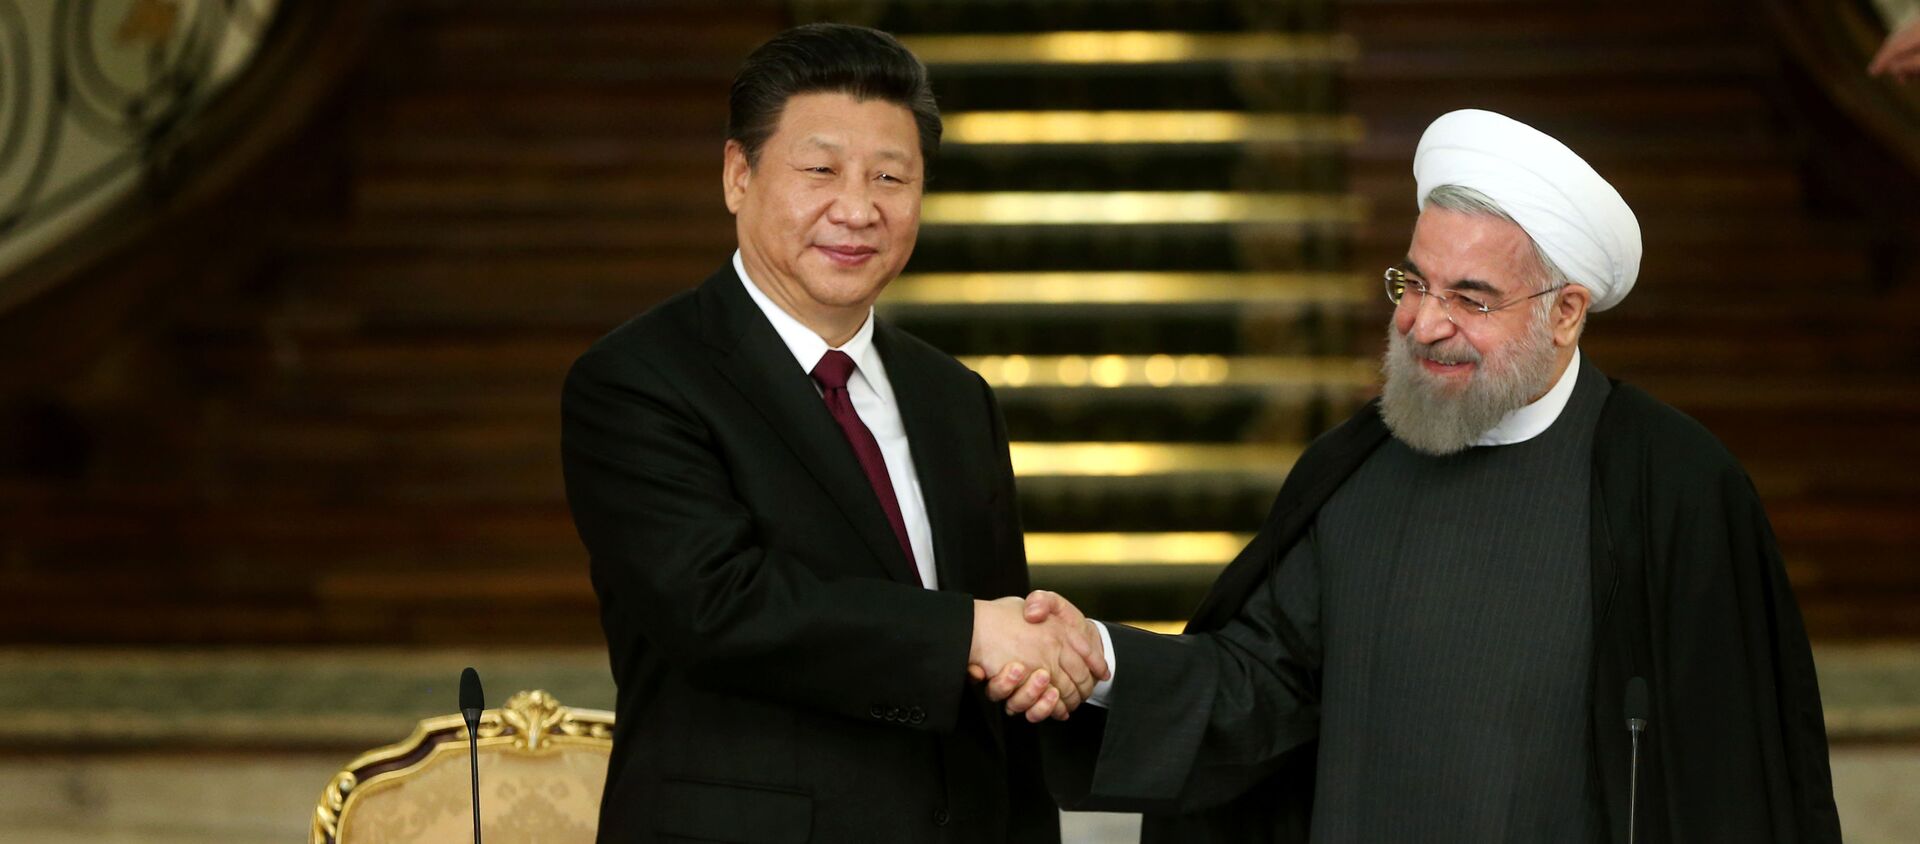 Iranian President Hassan Rouhani, right, and his Chinese counterpart Xi Jinping shake hands at the conclusion of their joint press conference at the Saadabad Palace in Tehran, Iran, Saturday, Jan. 23, 2016 - Sputnik International, 1920, 30.03.2021